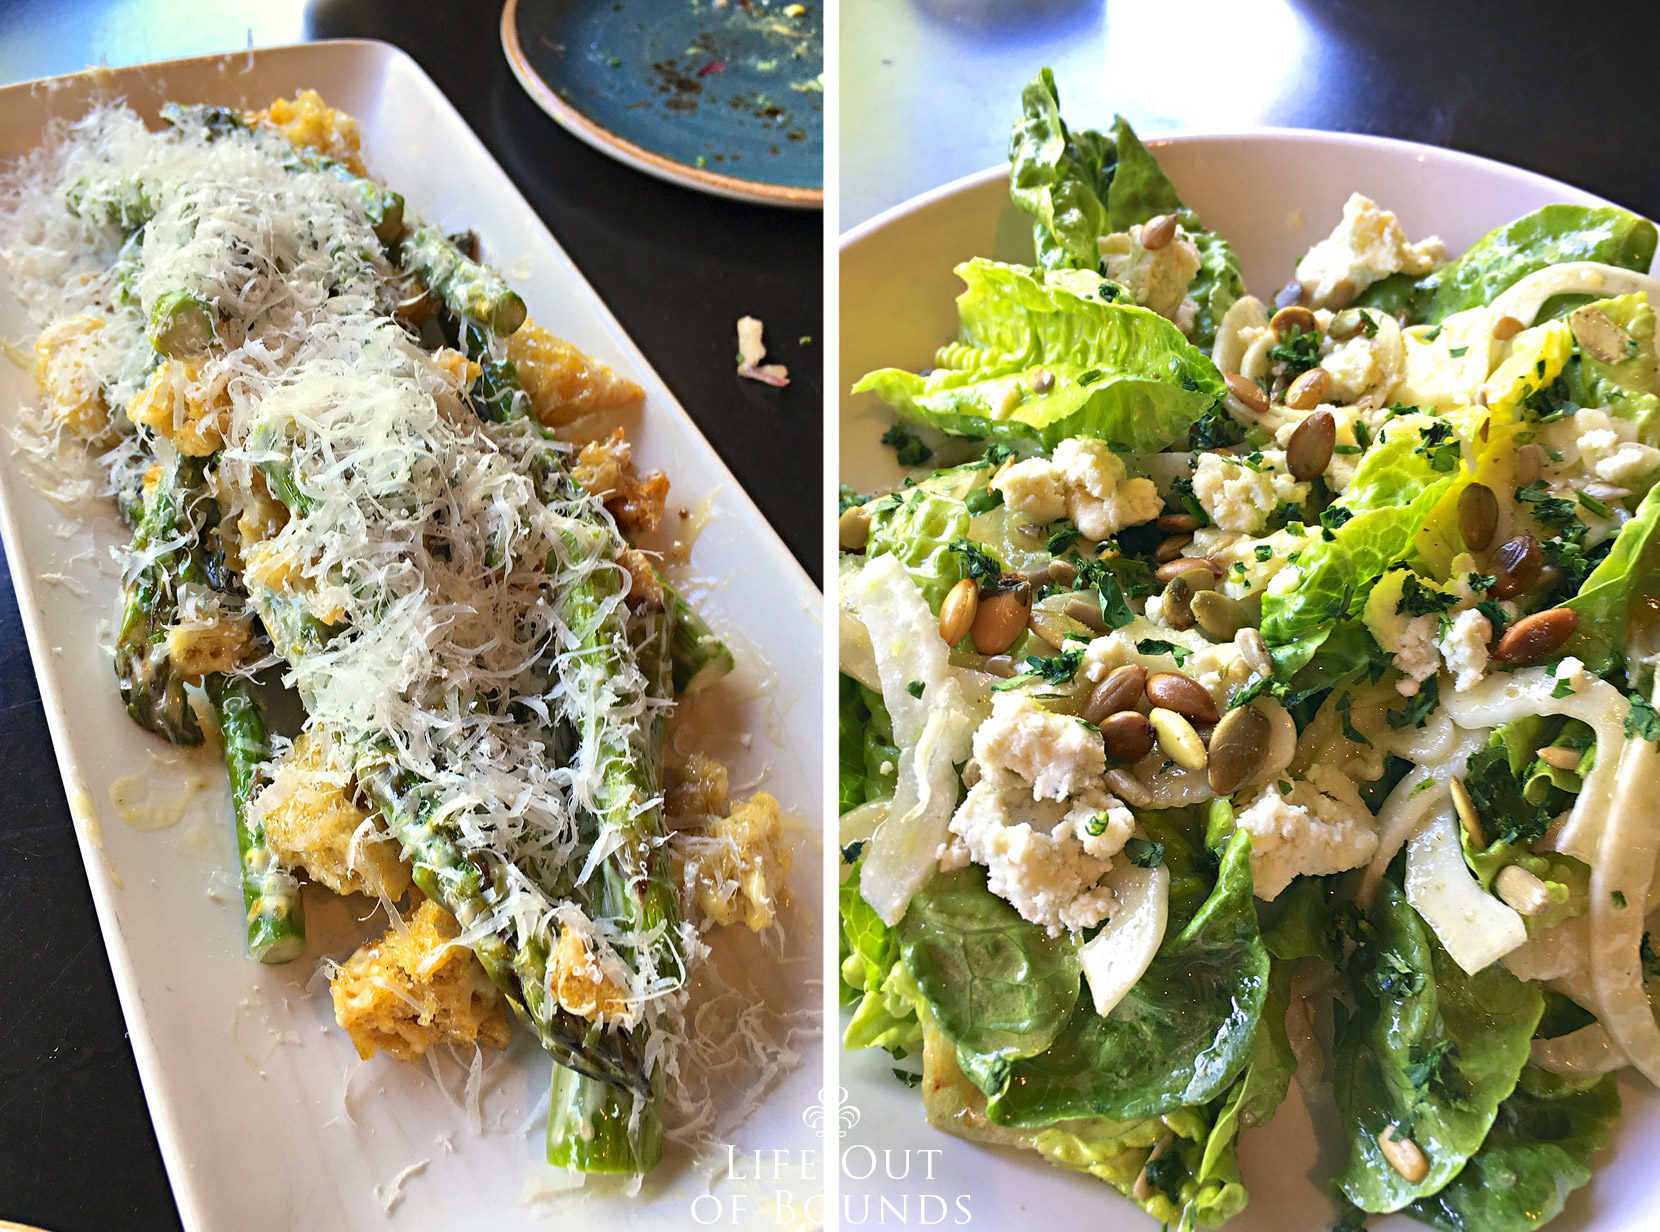 Chilled-Asparagus-Salad-with-Parmesan-and-Croutons-and-Seasonal-Salads-with-Mixed-Lettuces-Fennel-Blue-Cheese-Pumpkin-Seeds-and-Sherry-Vinaigrette-at-OSO-Restaurant-in-Sonoma-California